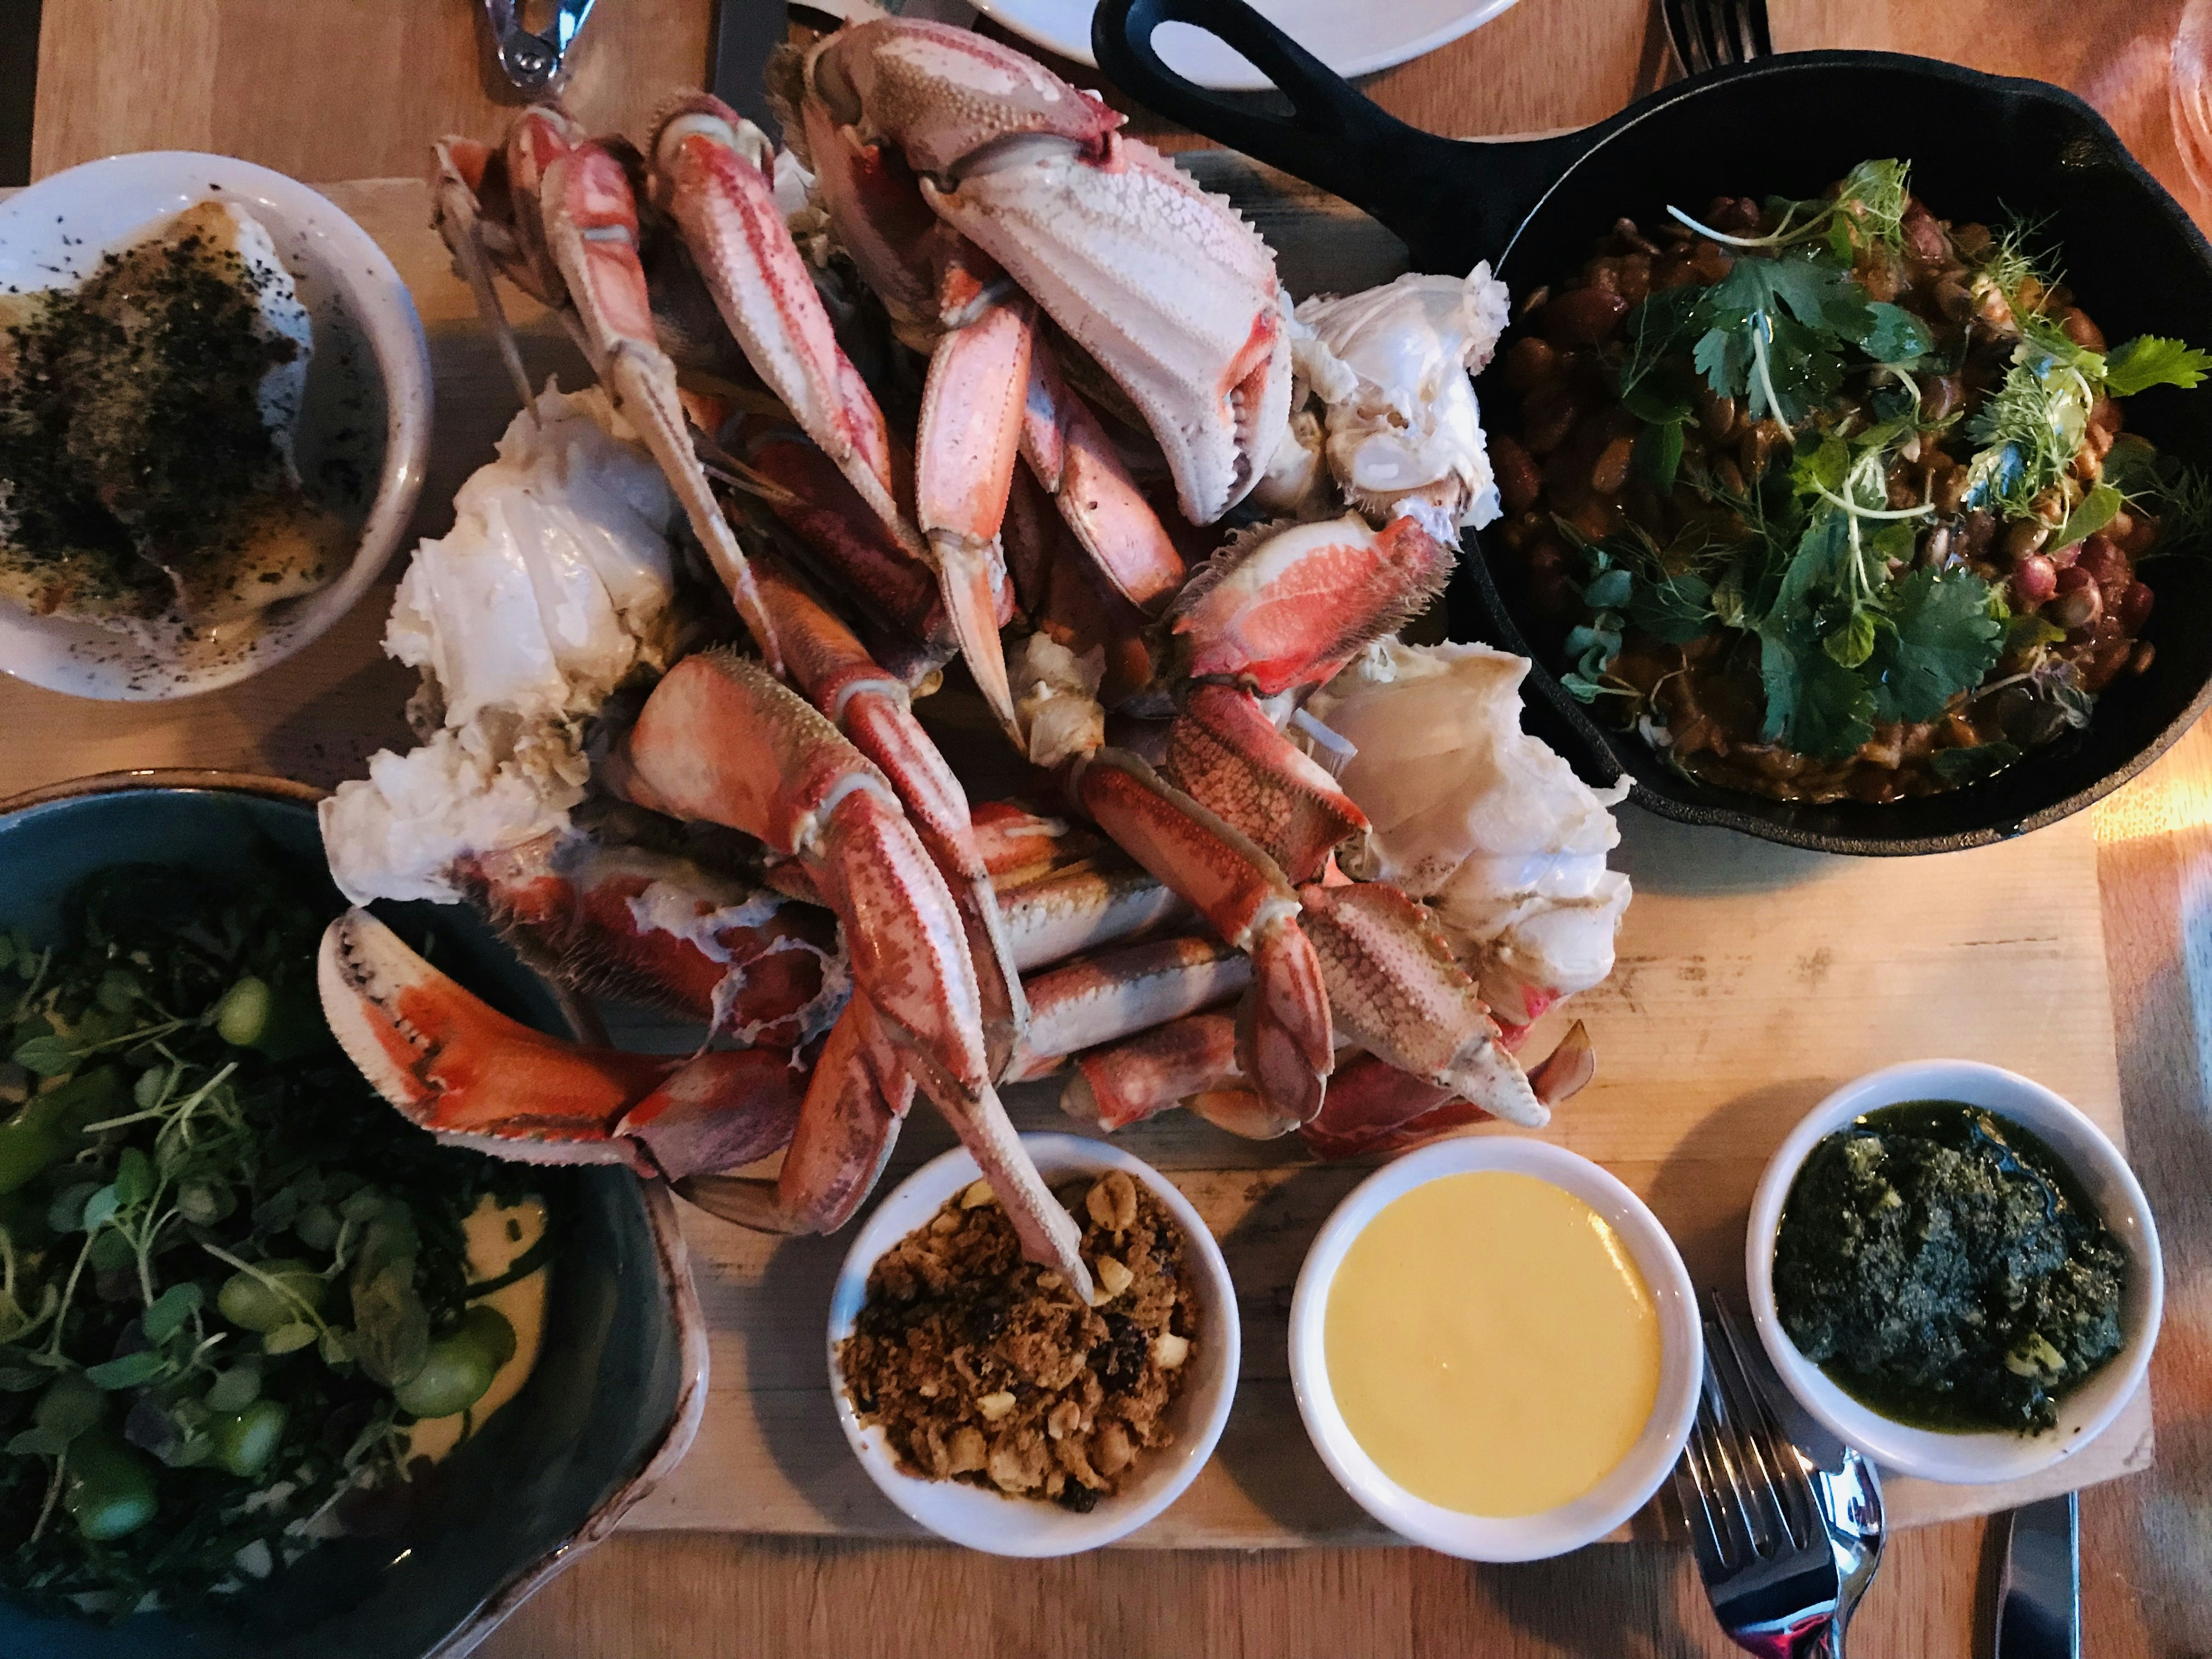 A blonde wooden table is laden with dishes at 1909 Kitchen. In the center is a huge pile of pink and white crab legs. To the lower left is a deep blue bowl with foraged micro-greens. Three small bowls are filled with peanuts and sauces. A small cast iron skillet in the top right is full of a brown dish garnished with parsley and more bright greens.